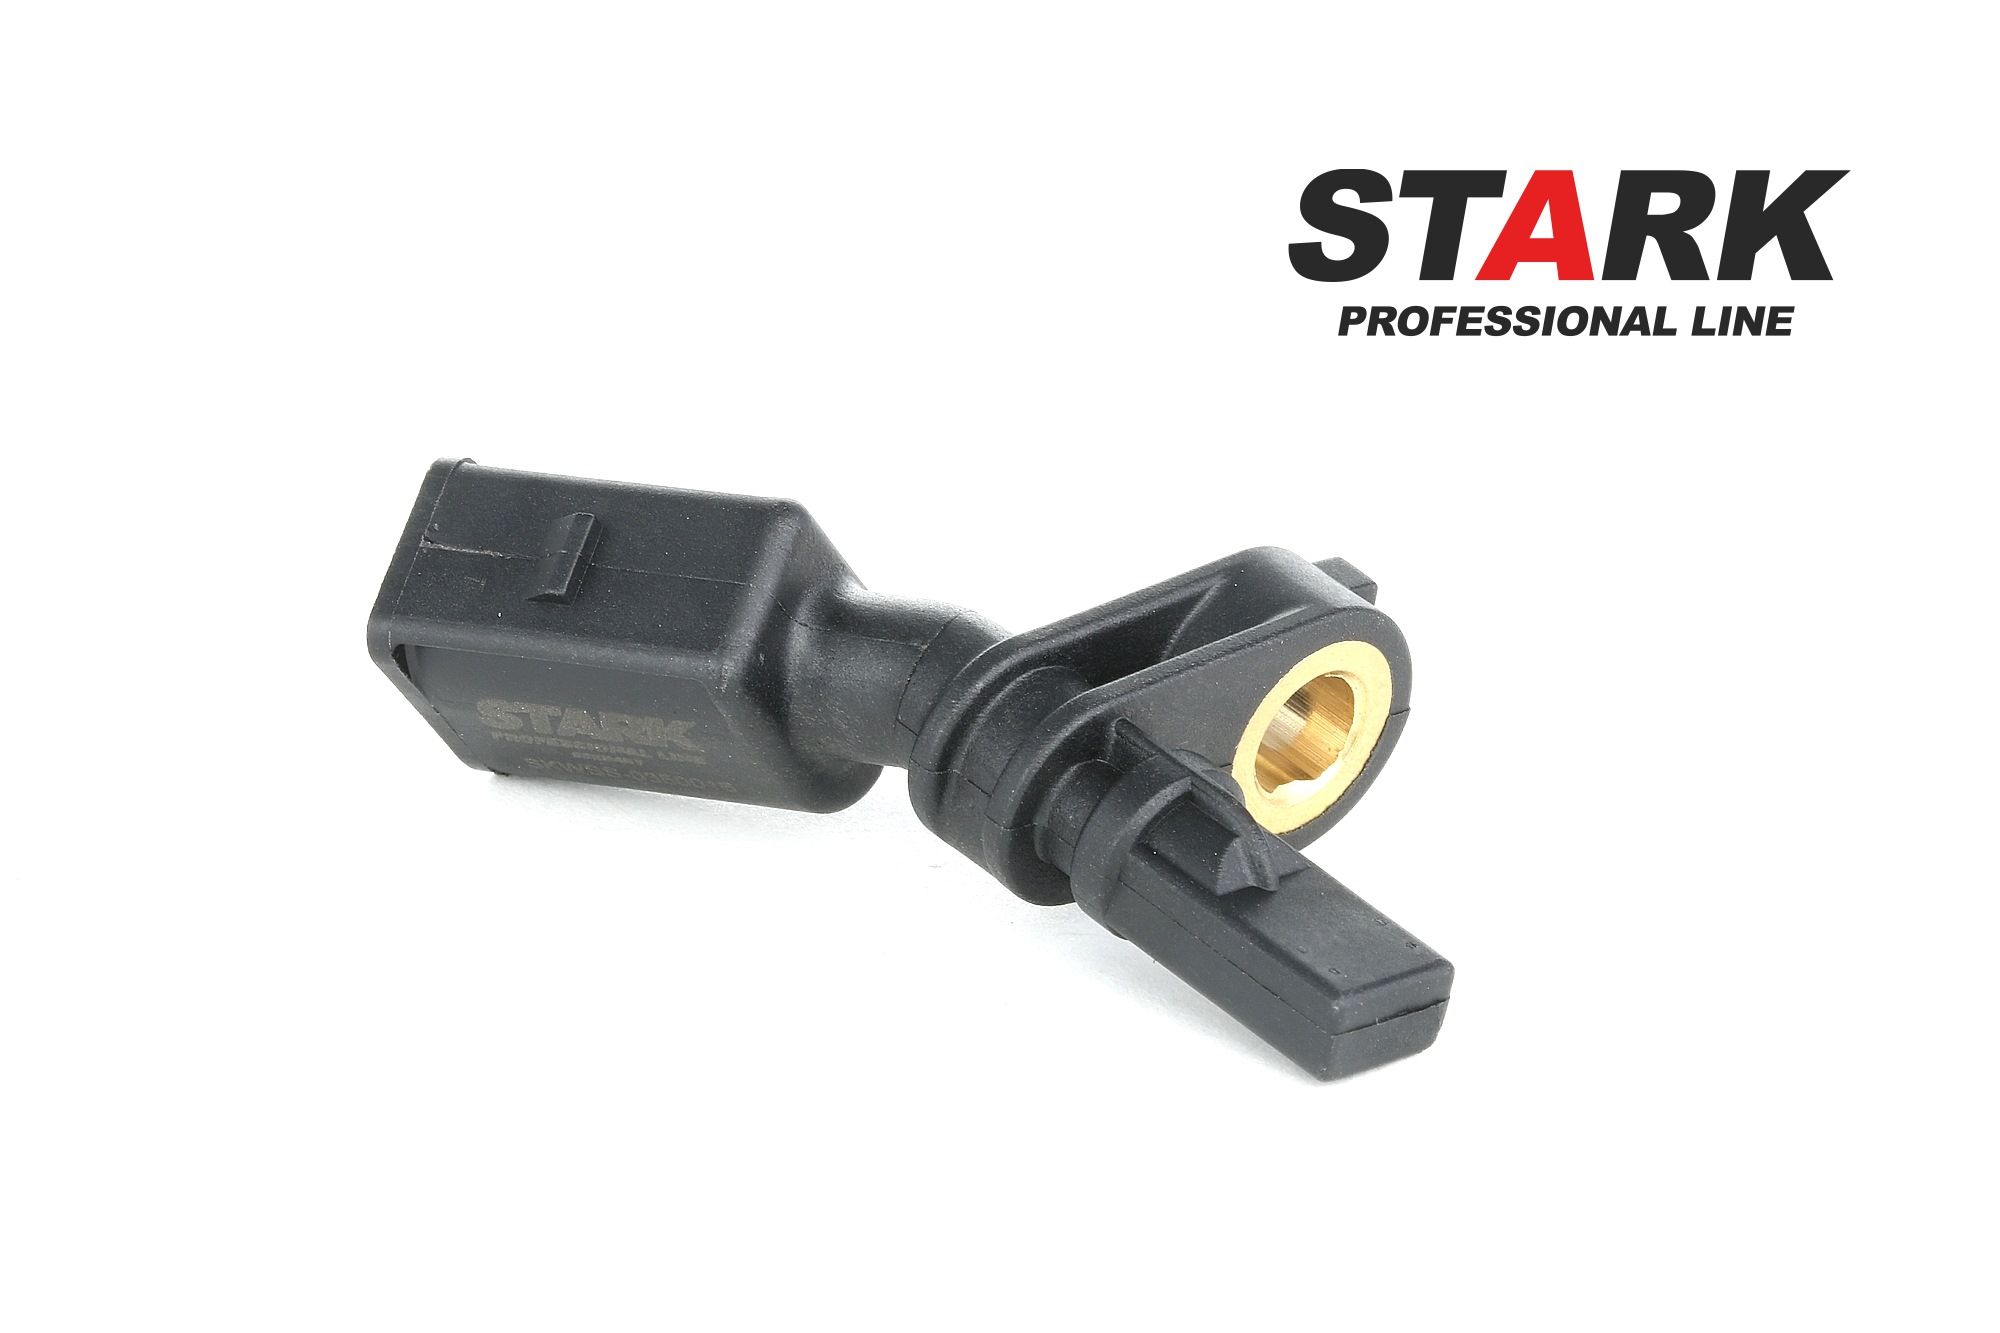 STARK SKWSS-0350016 ABS sensor Front Axle Right, without cable, Hall Sensor, 2-pin connector, 21mm, 62mm, D Shape